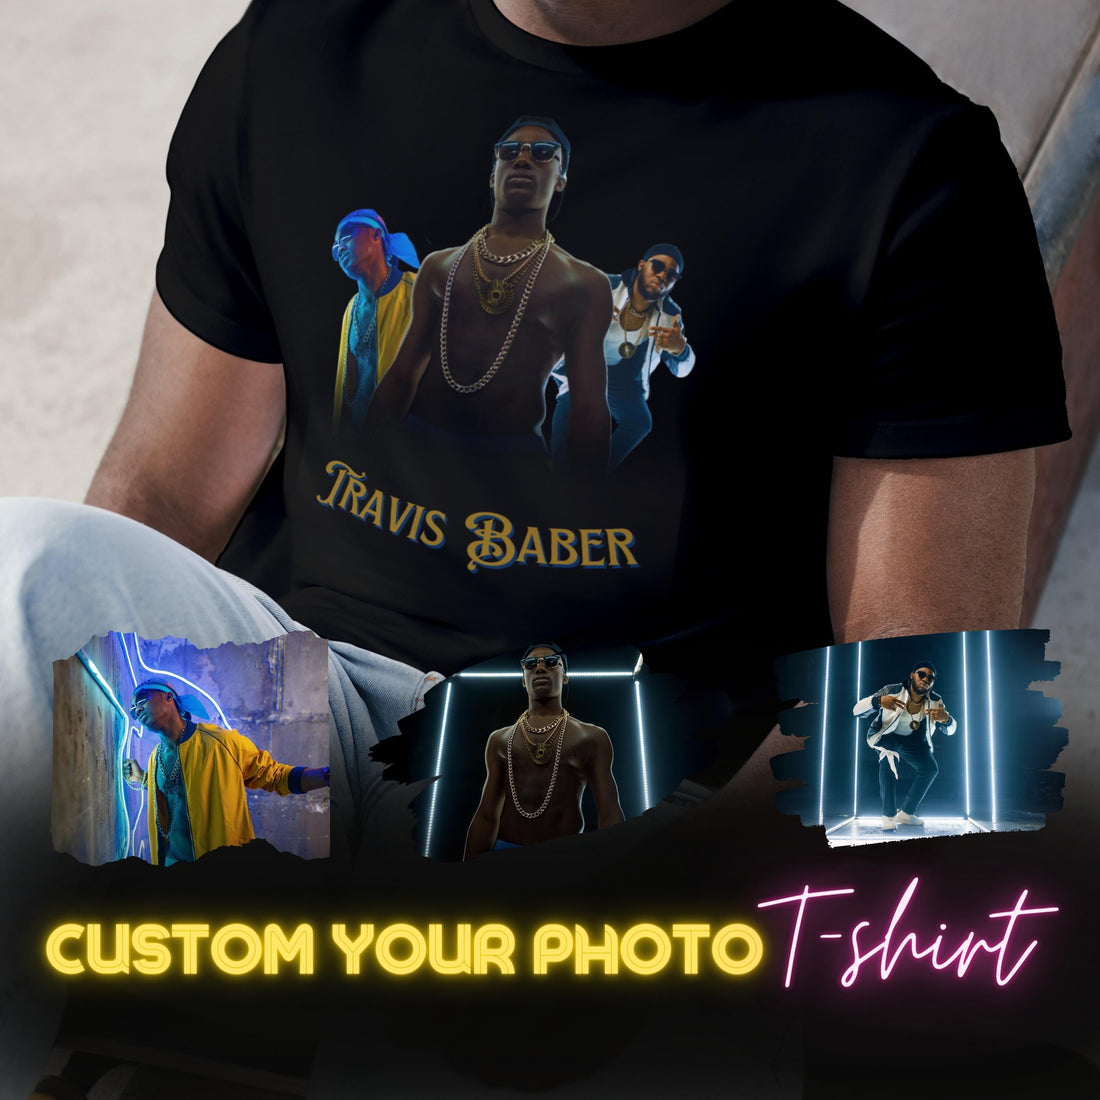 Customise Your Own Photo Unisex Heavy Cotton T-shirt, Bootleg Style Tshirt, Personalised Insert Image Tee Shirts, Birthday, Couple, Anniversary Gifts